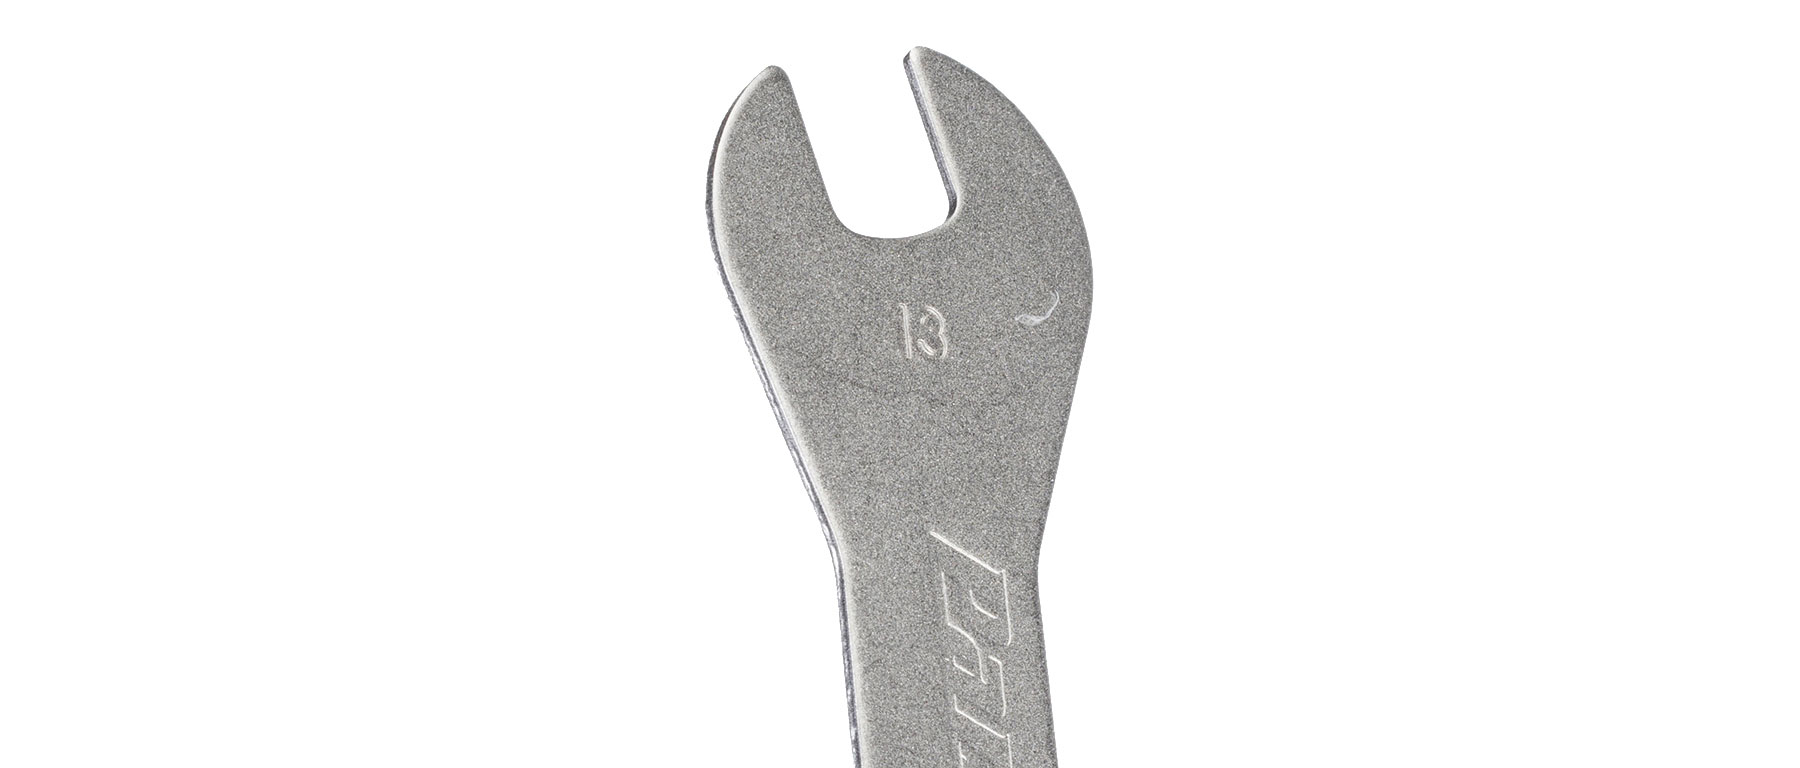 Park Tool DCW-4 Double Ended Cone Wrench